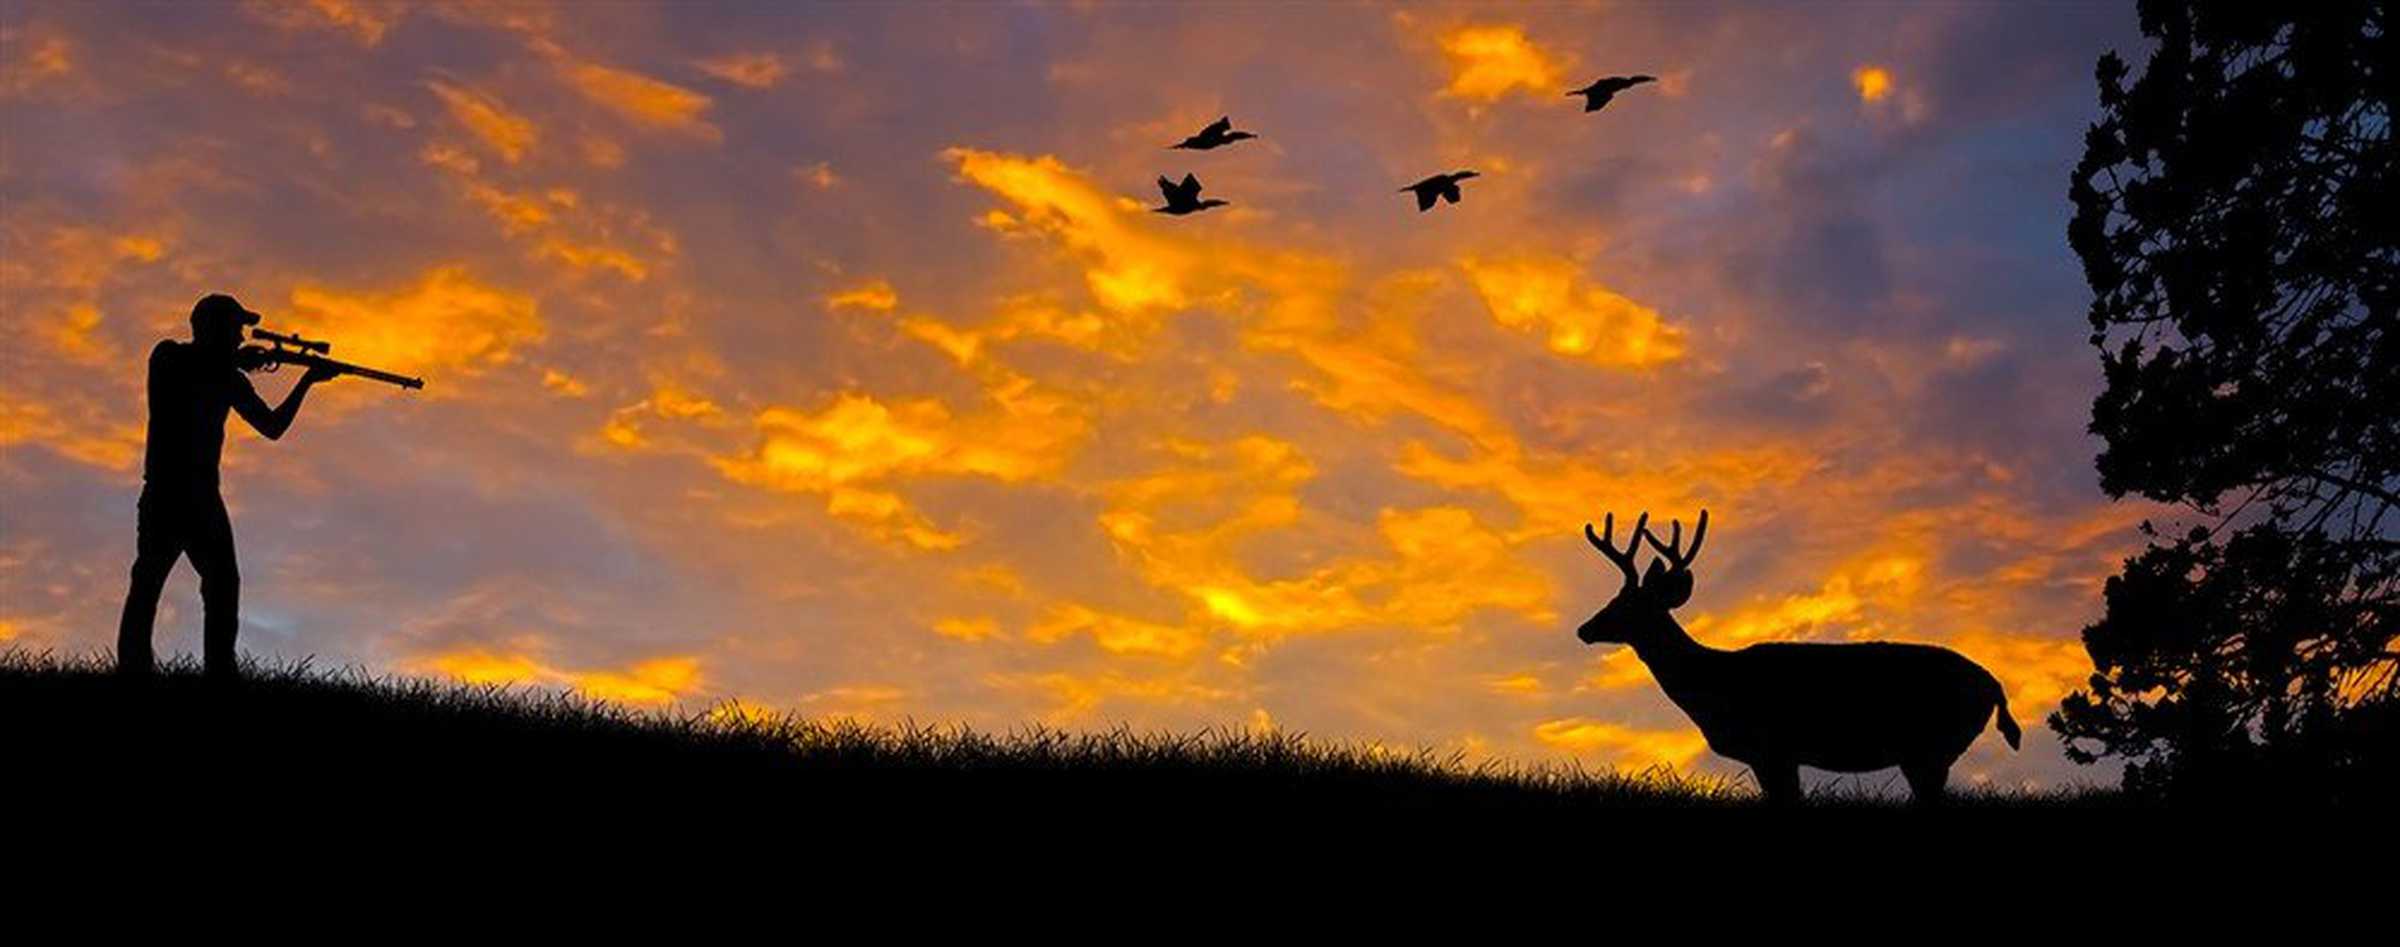 Hunter hunting a stag